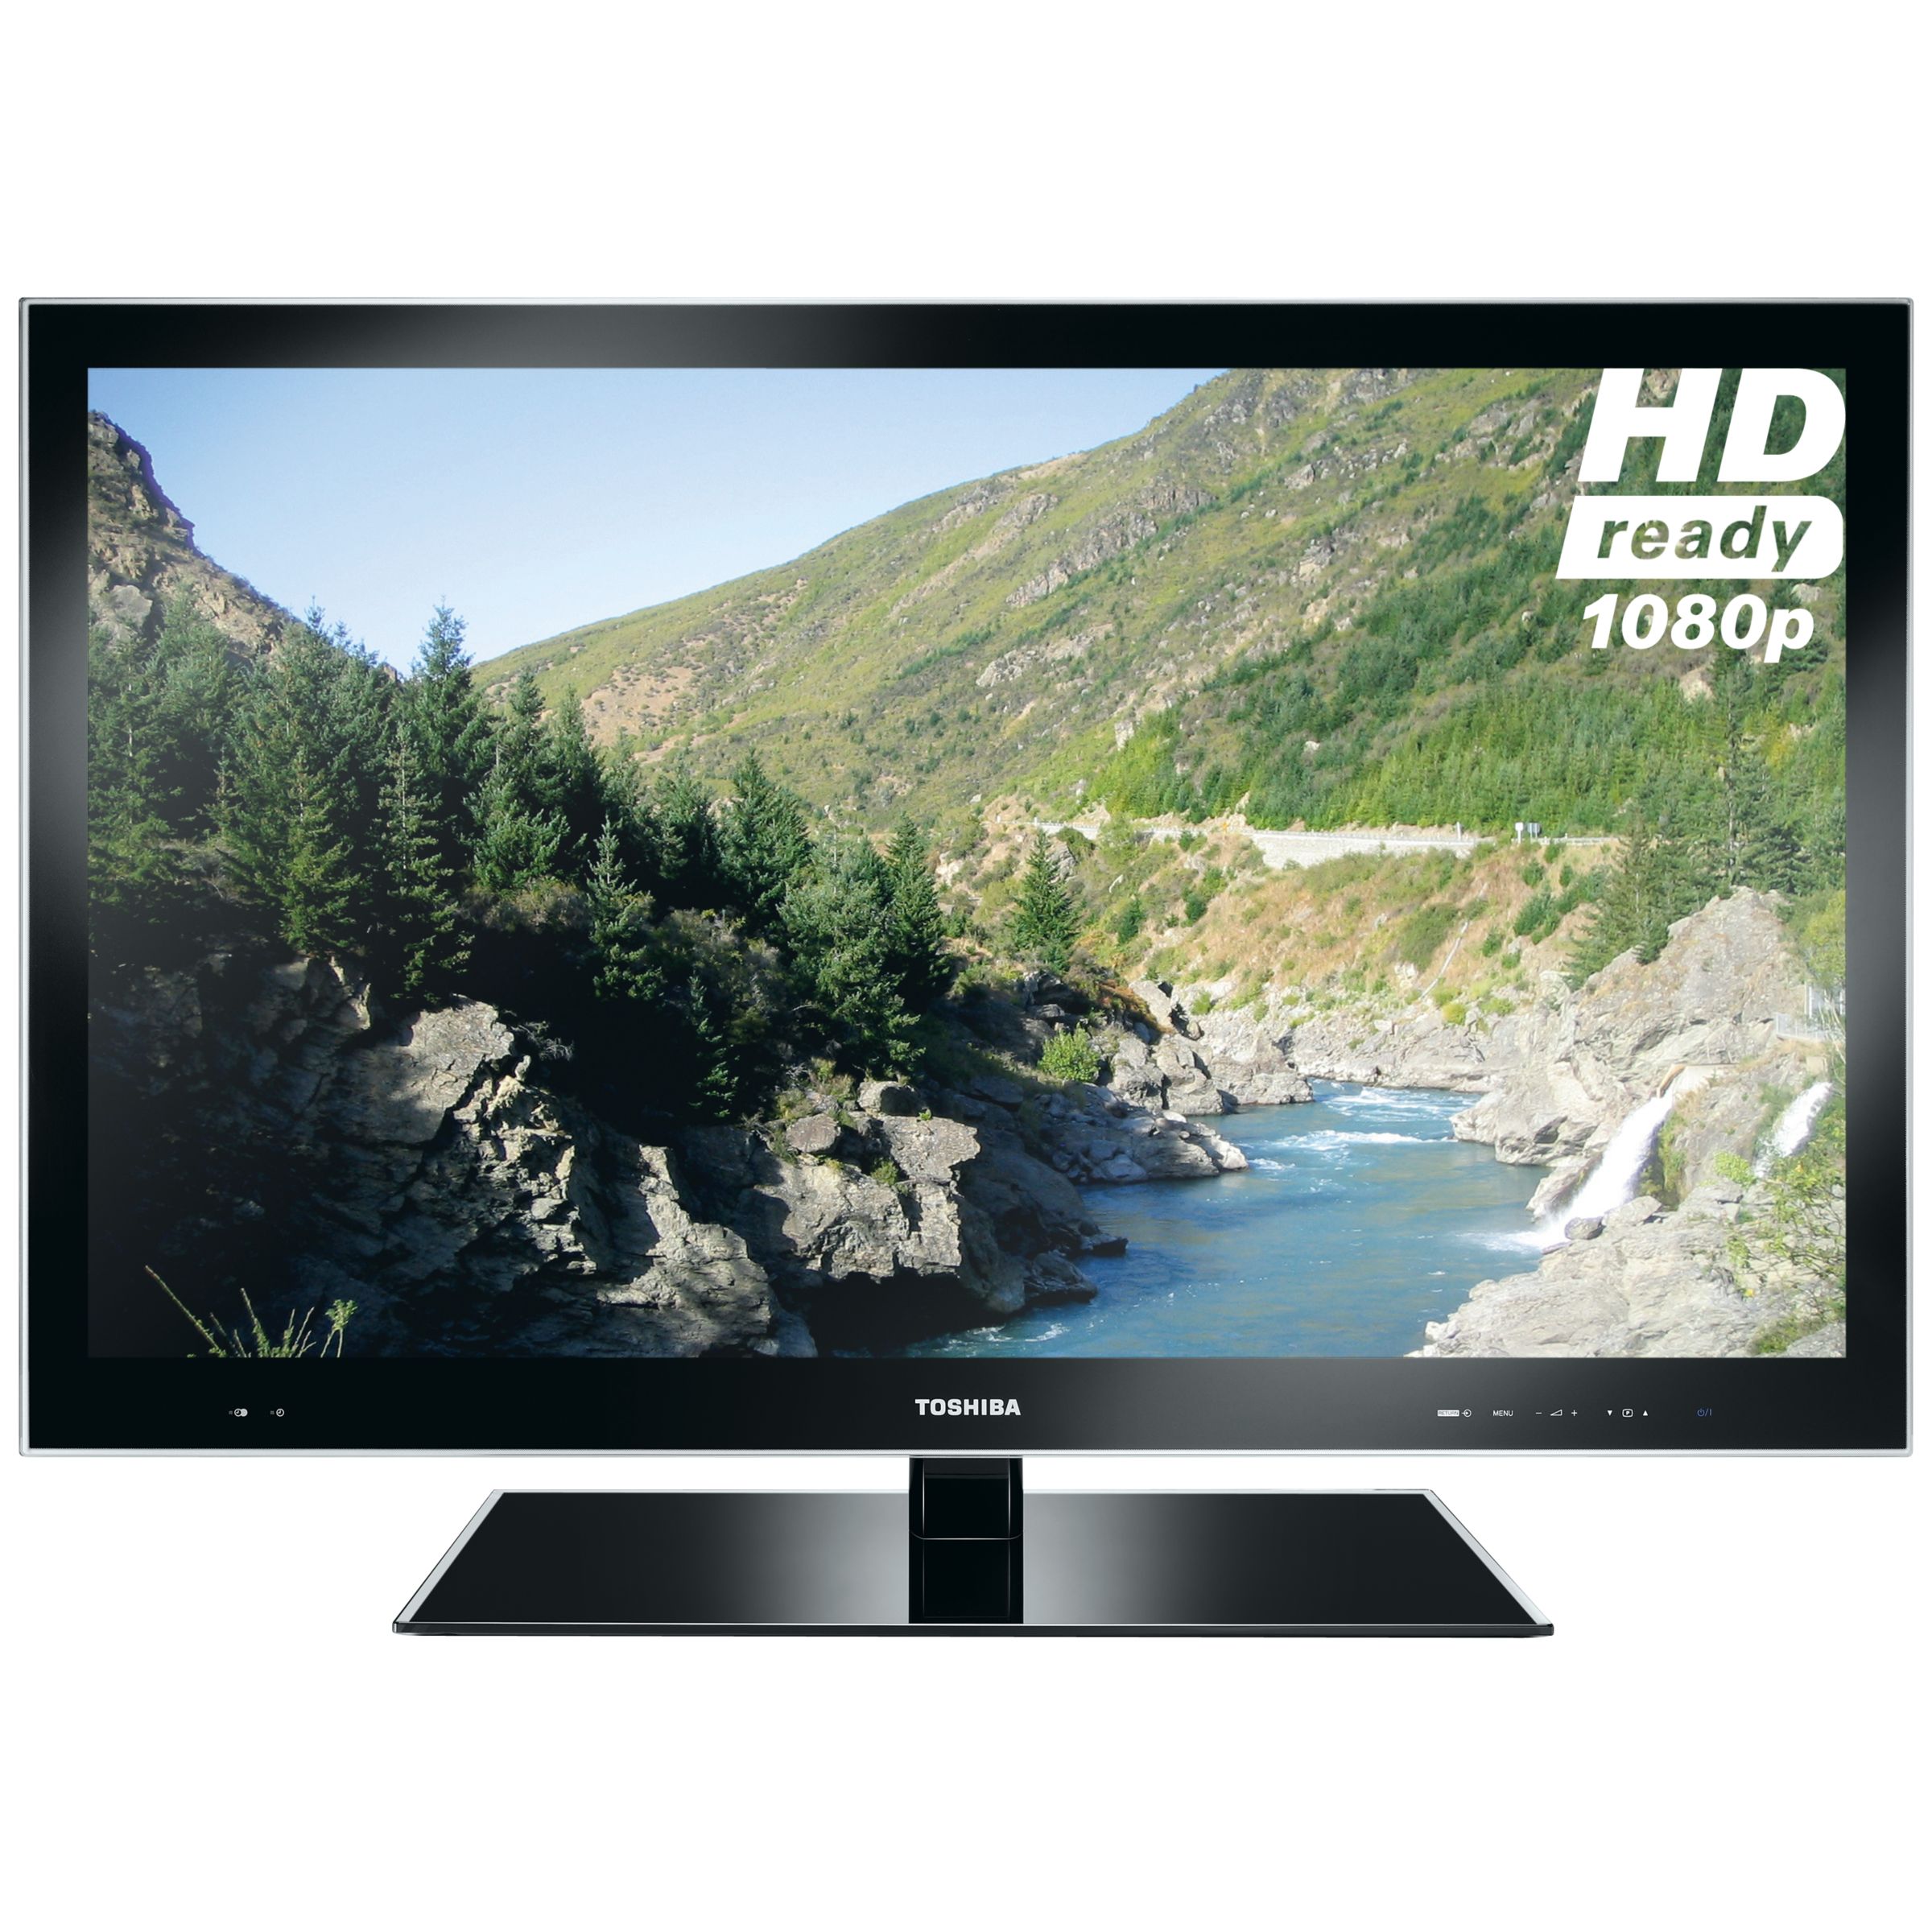 Toshiba Regza 40VL758 LED HD 1080p Television, 40 Inch with Built-in Freeview HD at JohnLewis